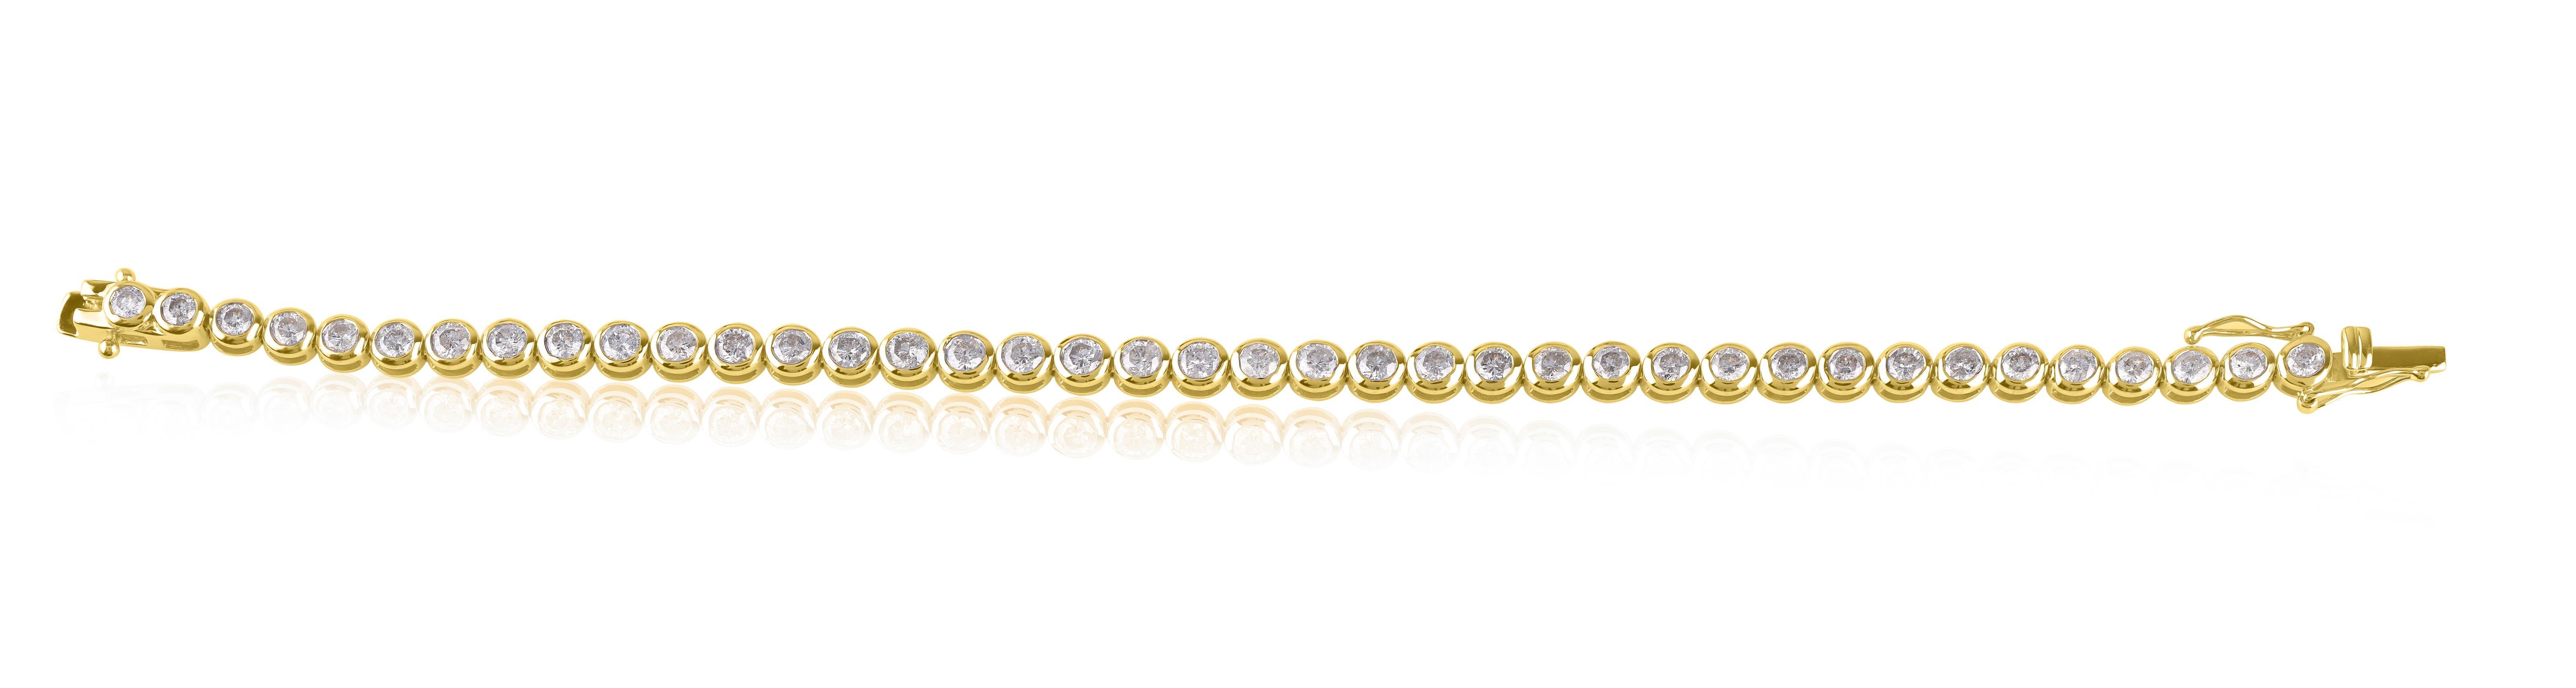 Illuminate your wrist with this dazzling diamond tennis bracelet. 39 round-cut diamonds studded elegantly in bezel setting. The diamonds are graded HI Color, I2-I3 Clarity. Handcrafted in 14 KT yellow gold, the bracelet comes along with an